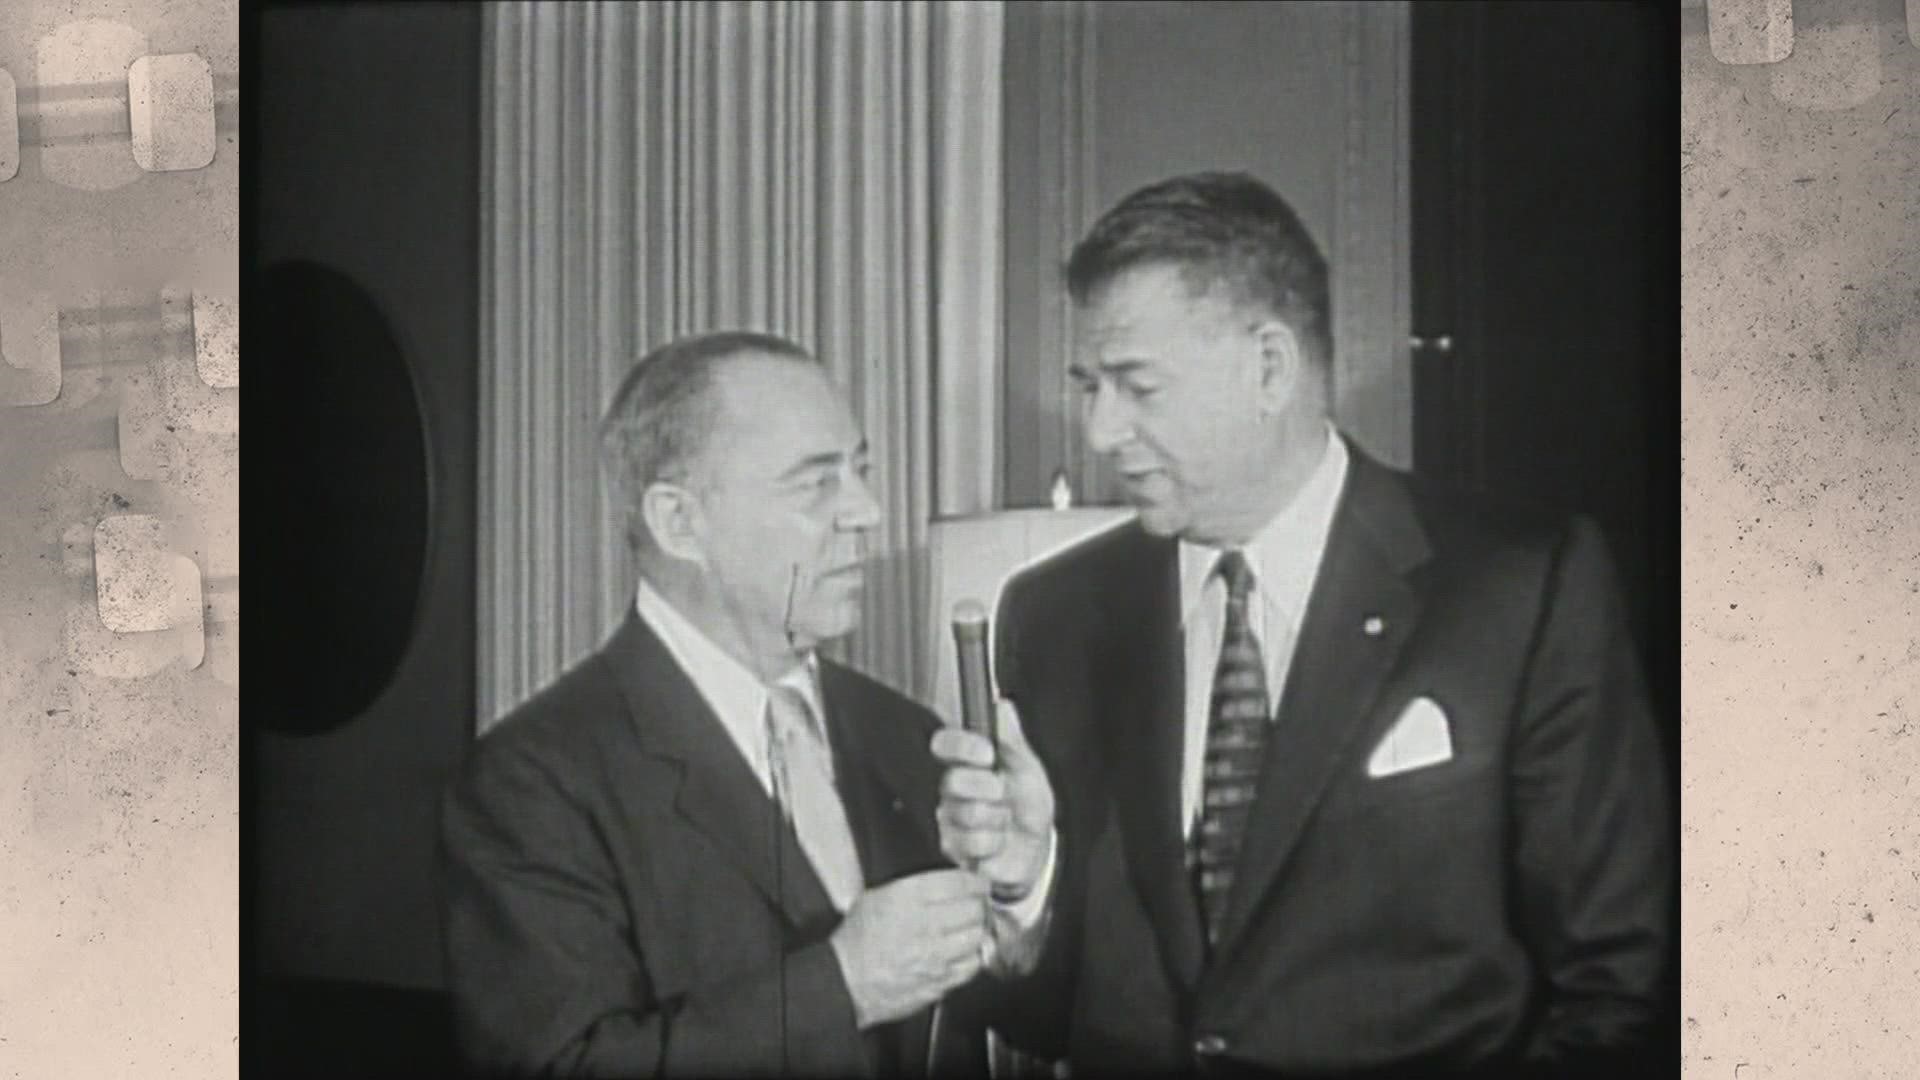 In 1955, The Muny staged its second Rodgers and Hammerstein Festival, and the titans of Broadway interviewed each other on KSDK.